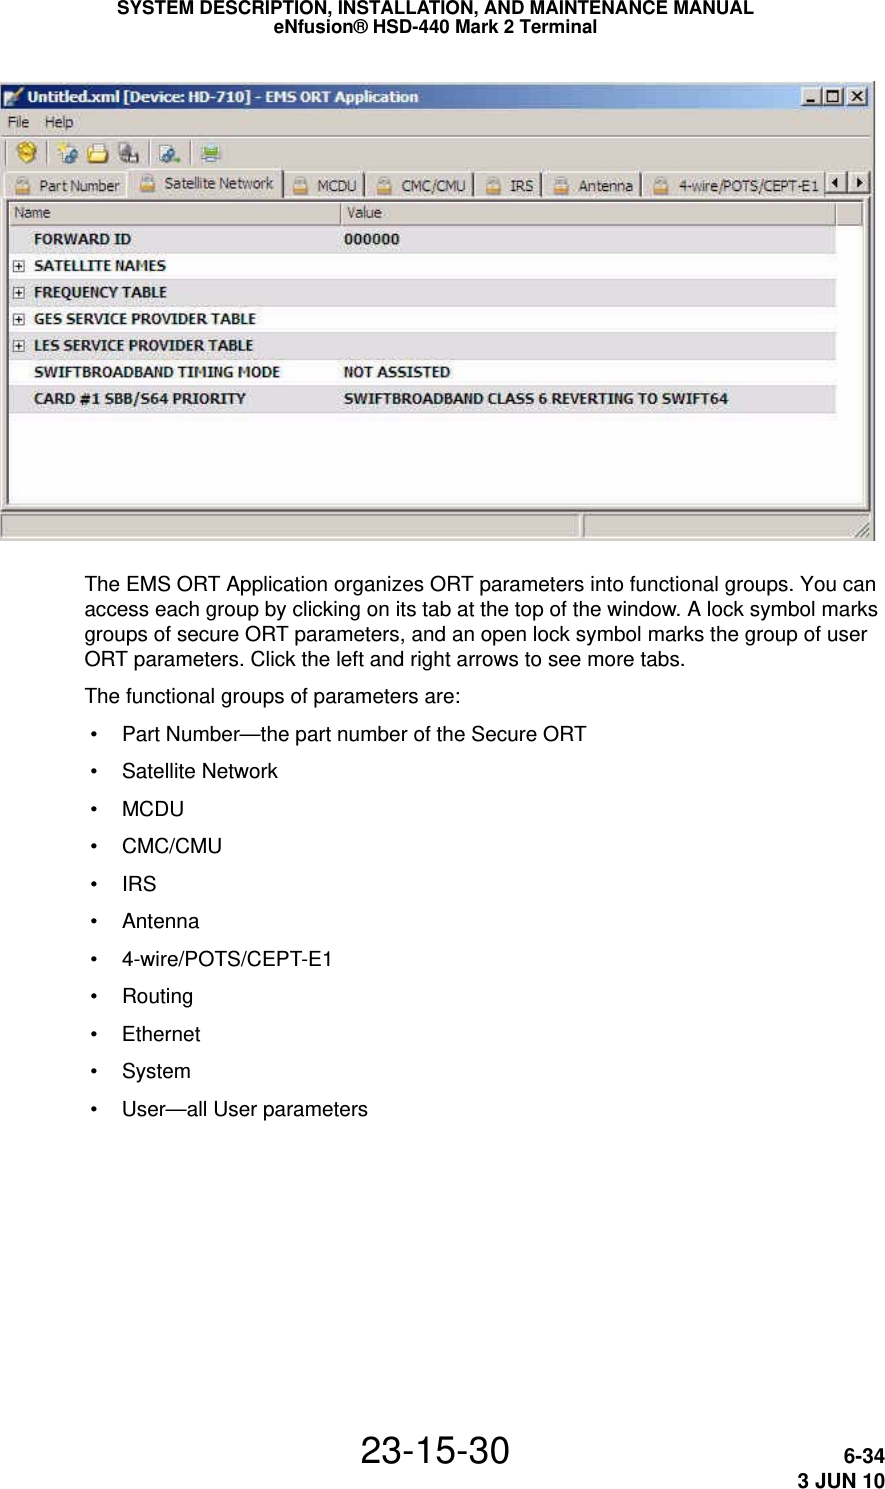 SYSTEM DESCRIPTION, INSTALLATION, AND MAINTENANCE MANUALeNfusion® HSD-440 Mark 2 Terminal23-15-30 6-343 JUN 10The EMS ORT Application organizes ORT parameters into functional groups. You can access each group by clicking on its tab at the top of the window. A lock symbol marks groups of secure ORT parameters, and an open lock symbol marks the group of user ORT parameters. Click the left and right arrows to see more tabs.The functional groups of parameters are: • Part Number—the part number of the Secure ORT • Satellite Network •MCDU • CMC/CMU •IRS • Antenna • 4-wire/POTS/CEPT-E1 • Routing • Ethernet • System • User—all User parameters